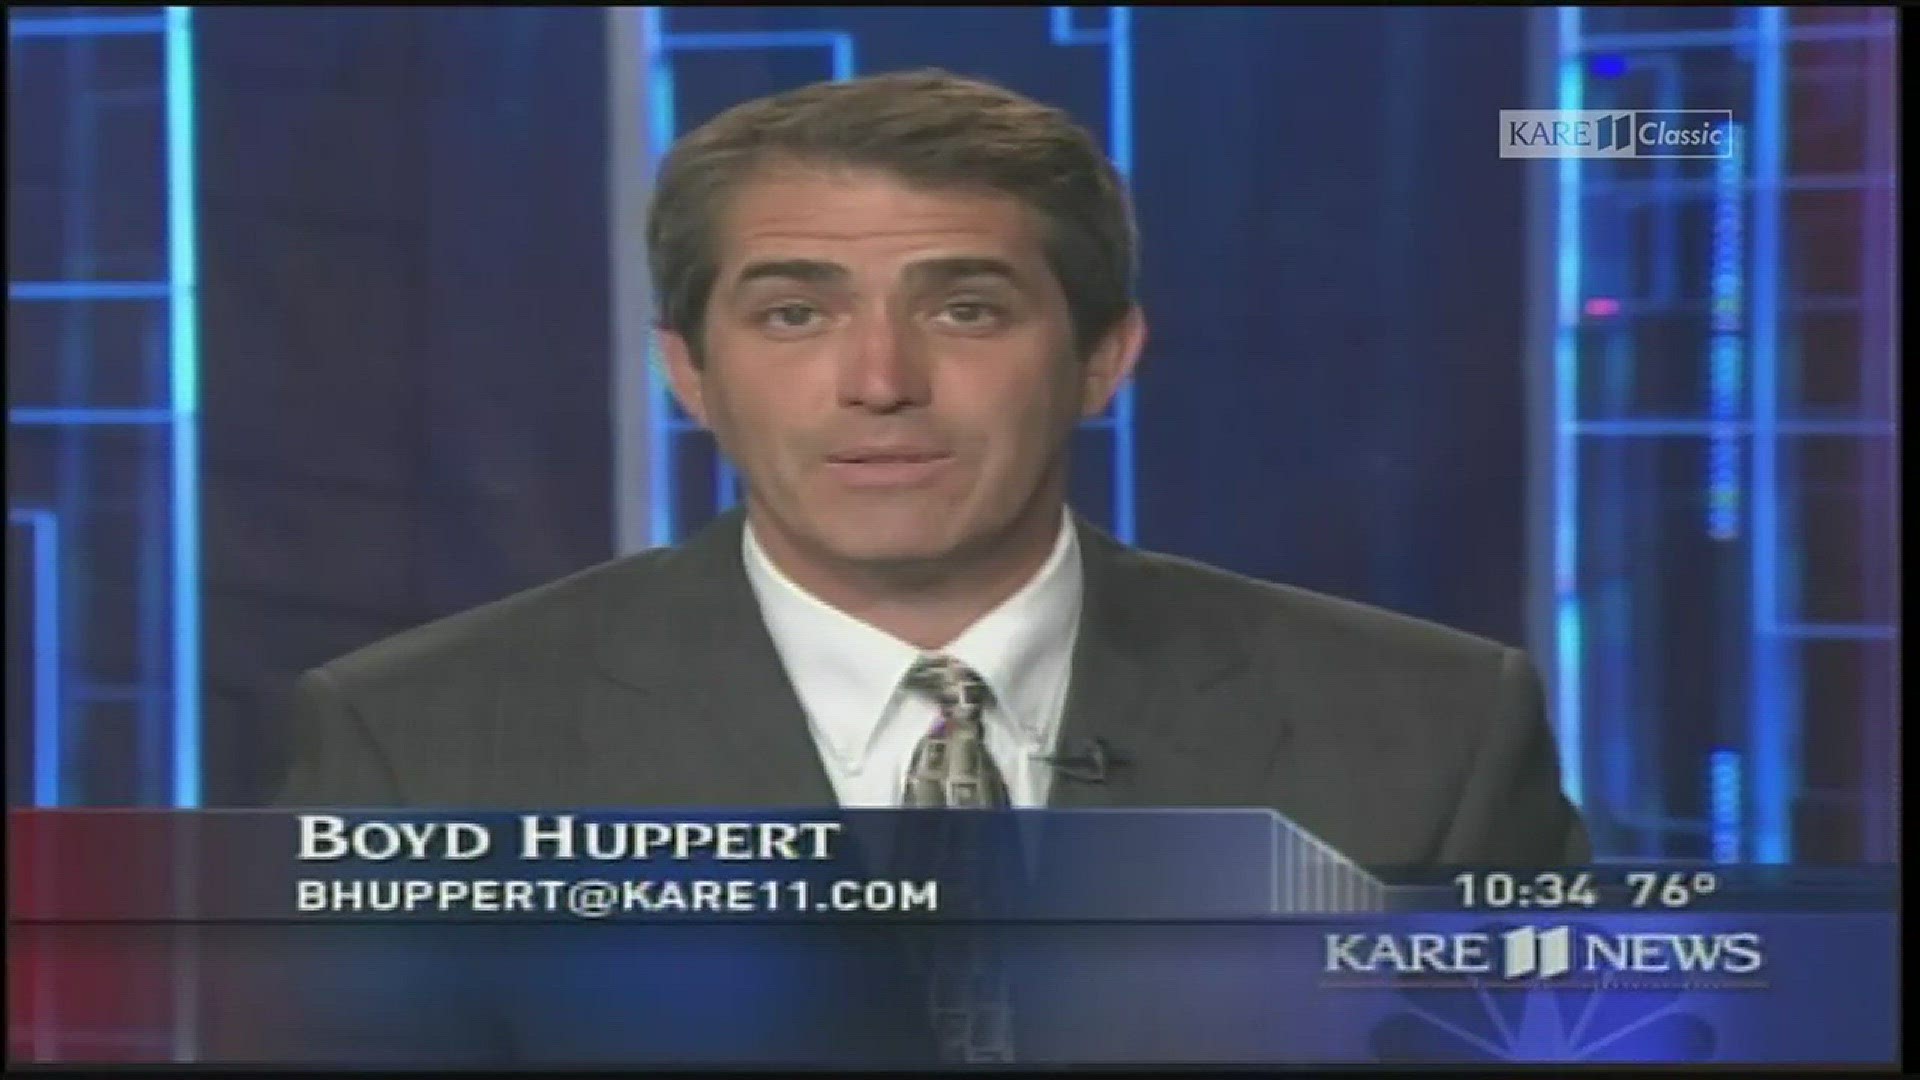 Boyd Huppert reports on the 35W Bridge Collapse on Aug. 1, 2007